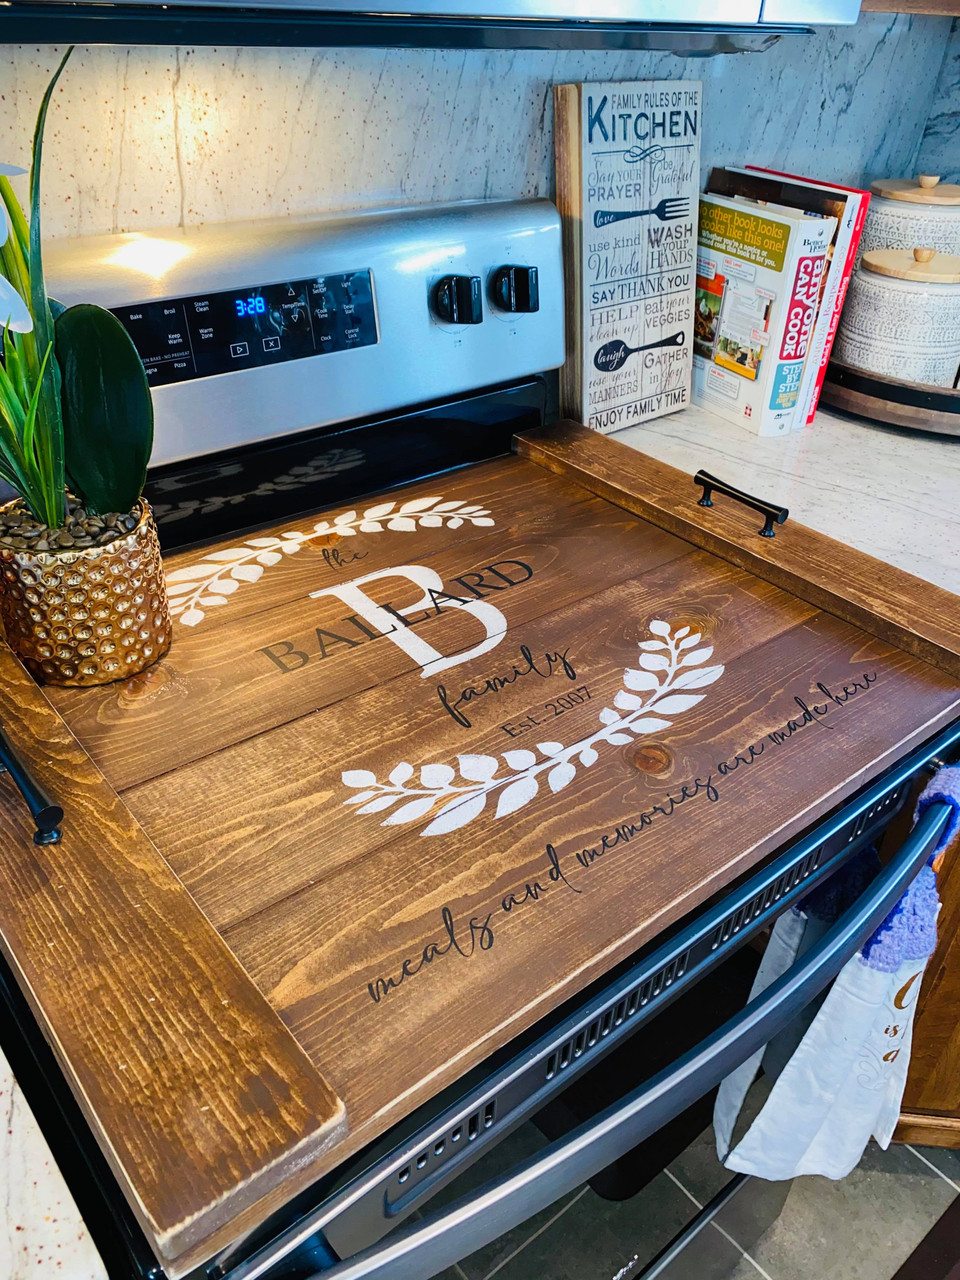 Noodle board stove cover - Wood & Whatnot